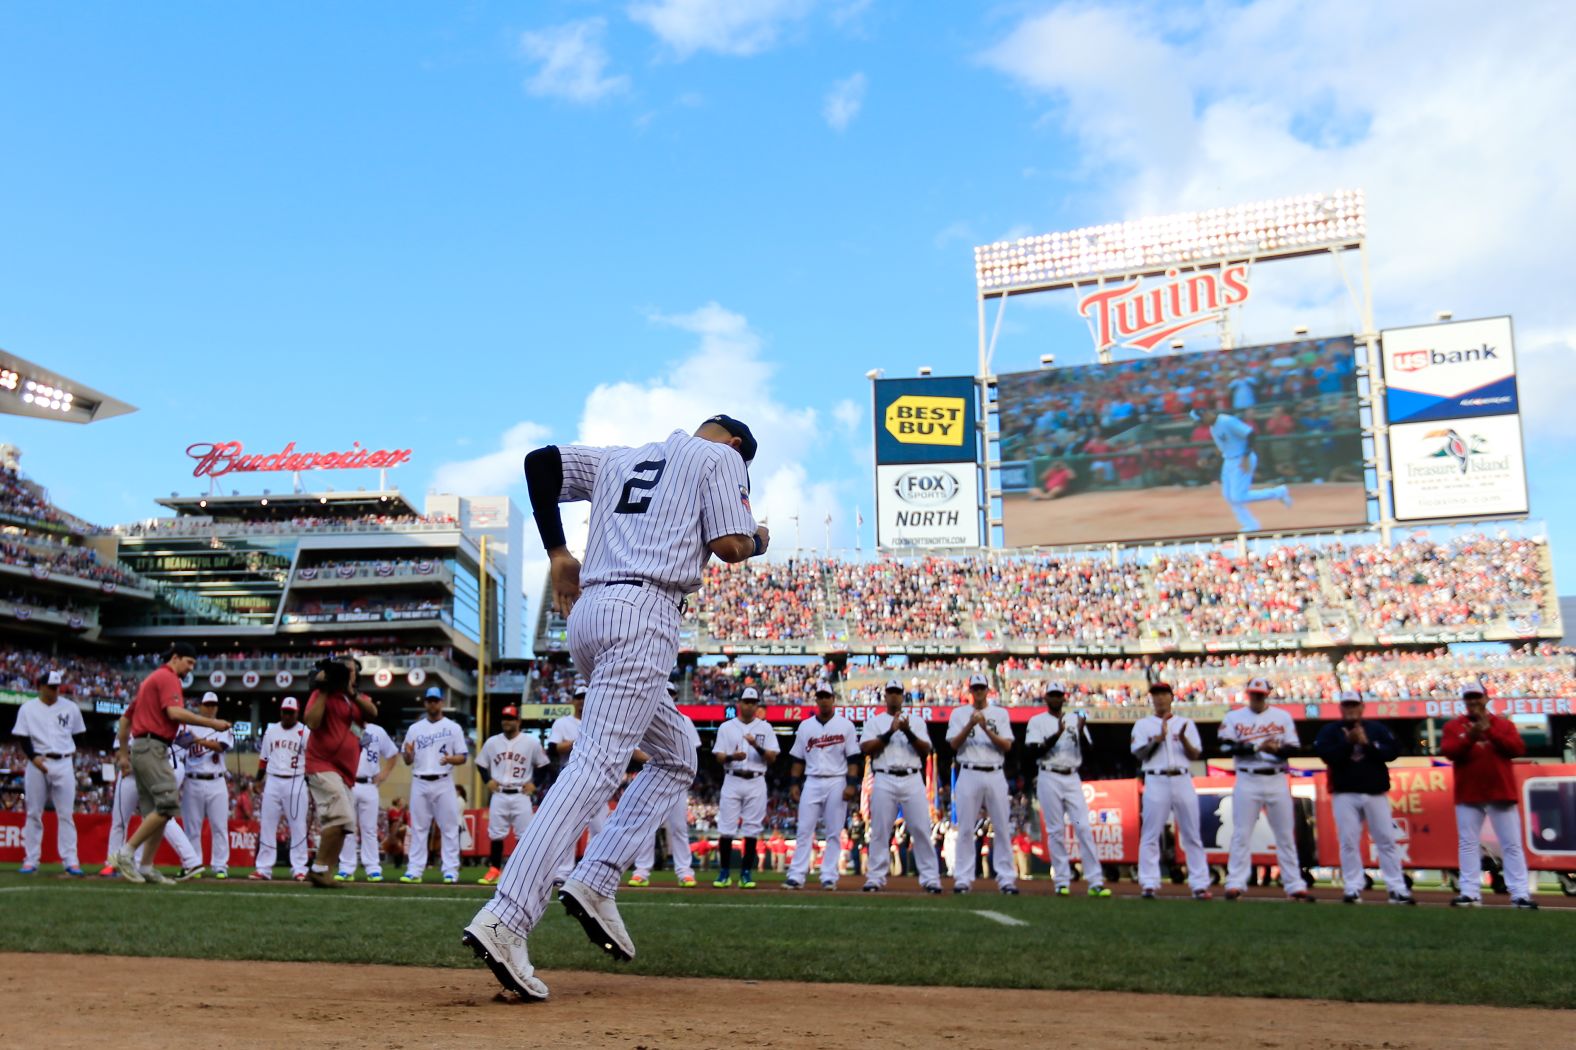 Jeter is introduced to the crowd at Minnesota's Target Field before playing in his final All-Star Game in July 2014.